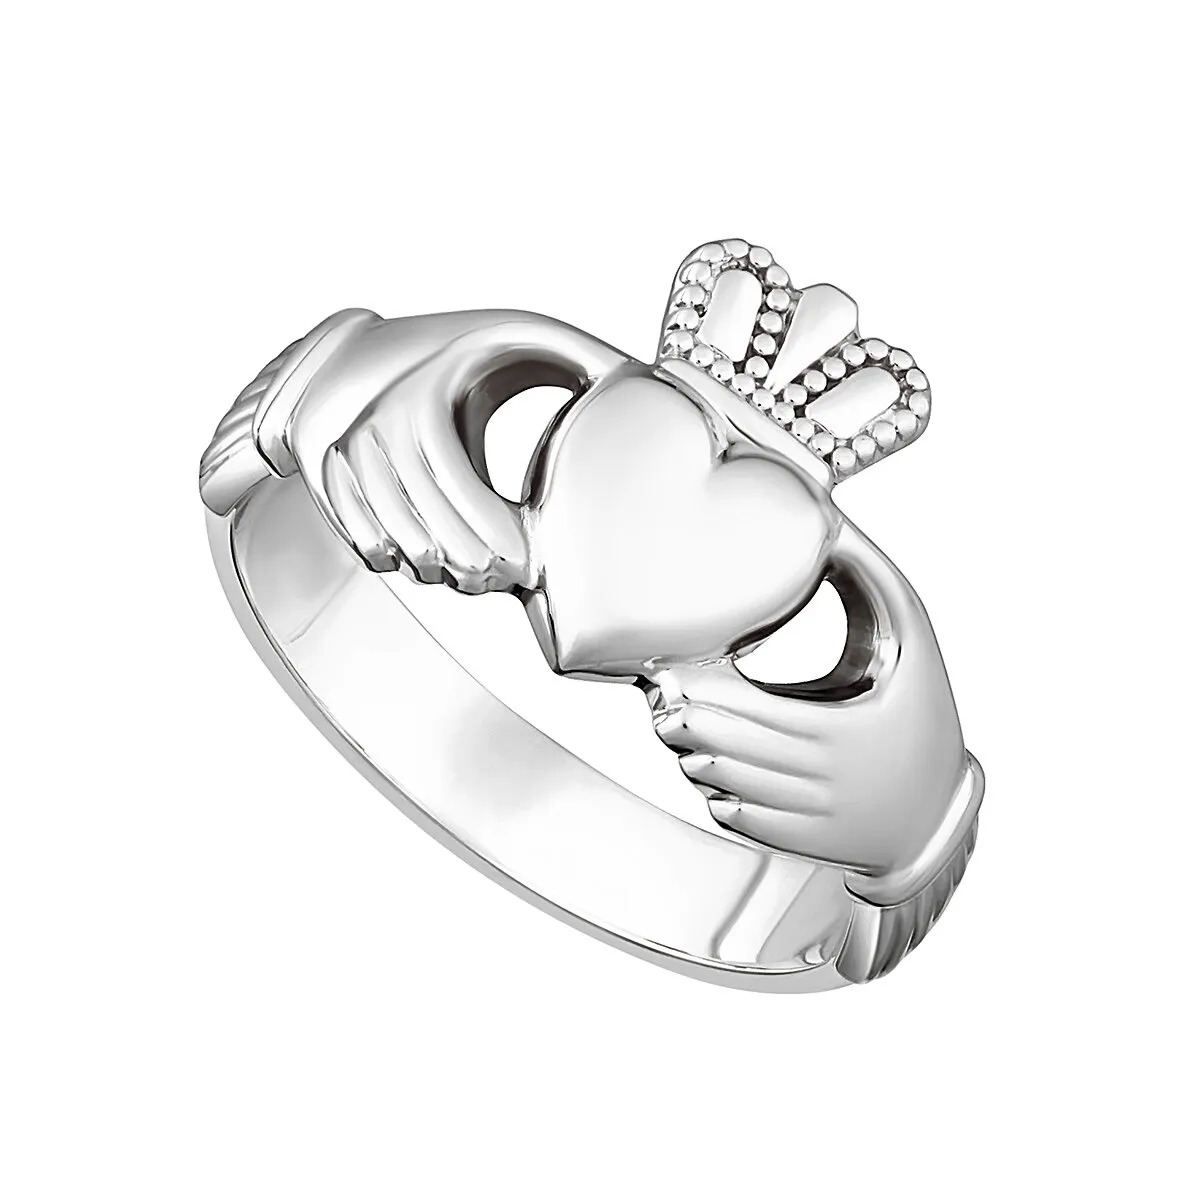 Mens Sterling Silver Heavy Claddagh Ring...